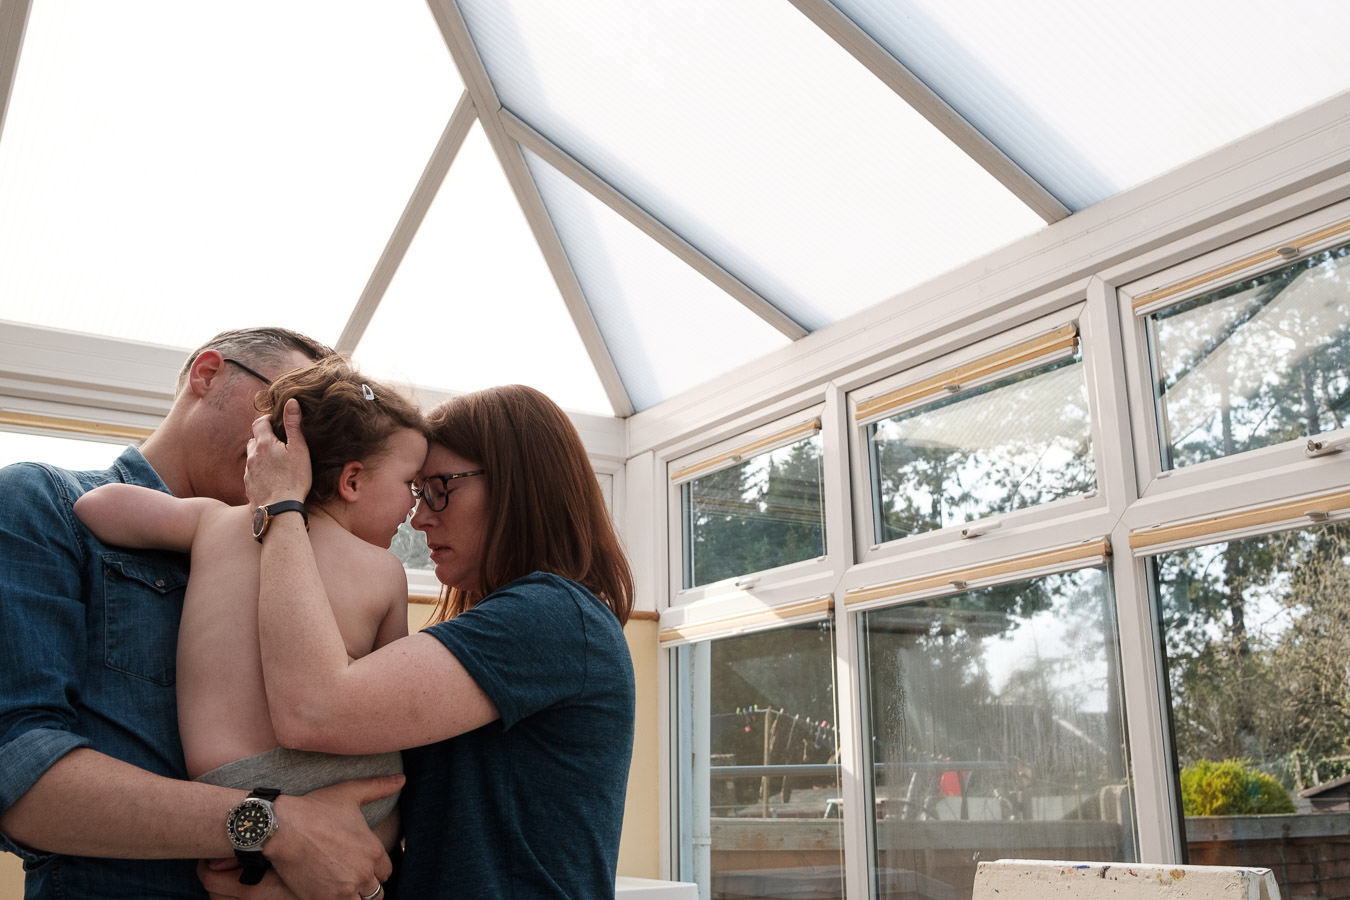 Family of parents and daughter embracing in conservatory.